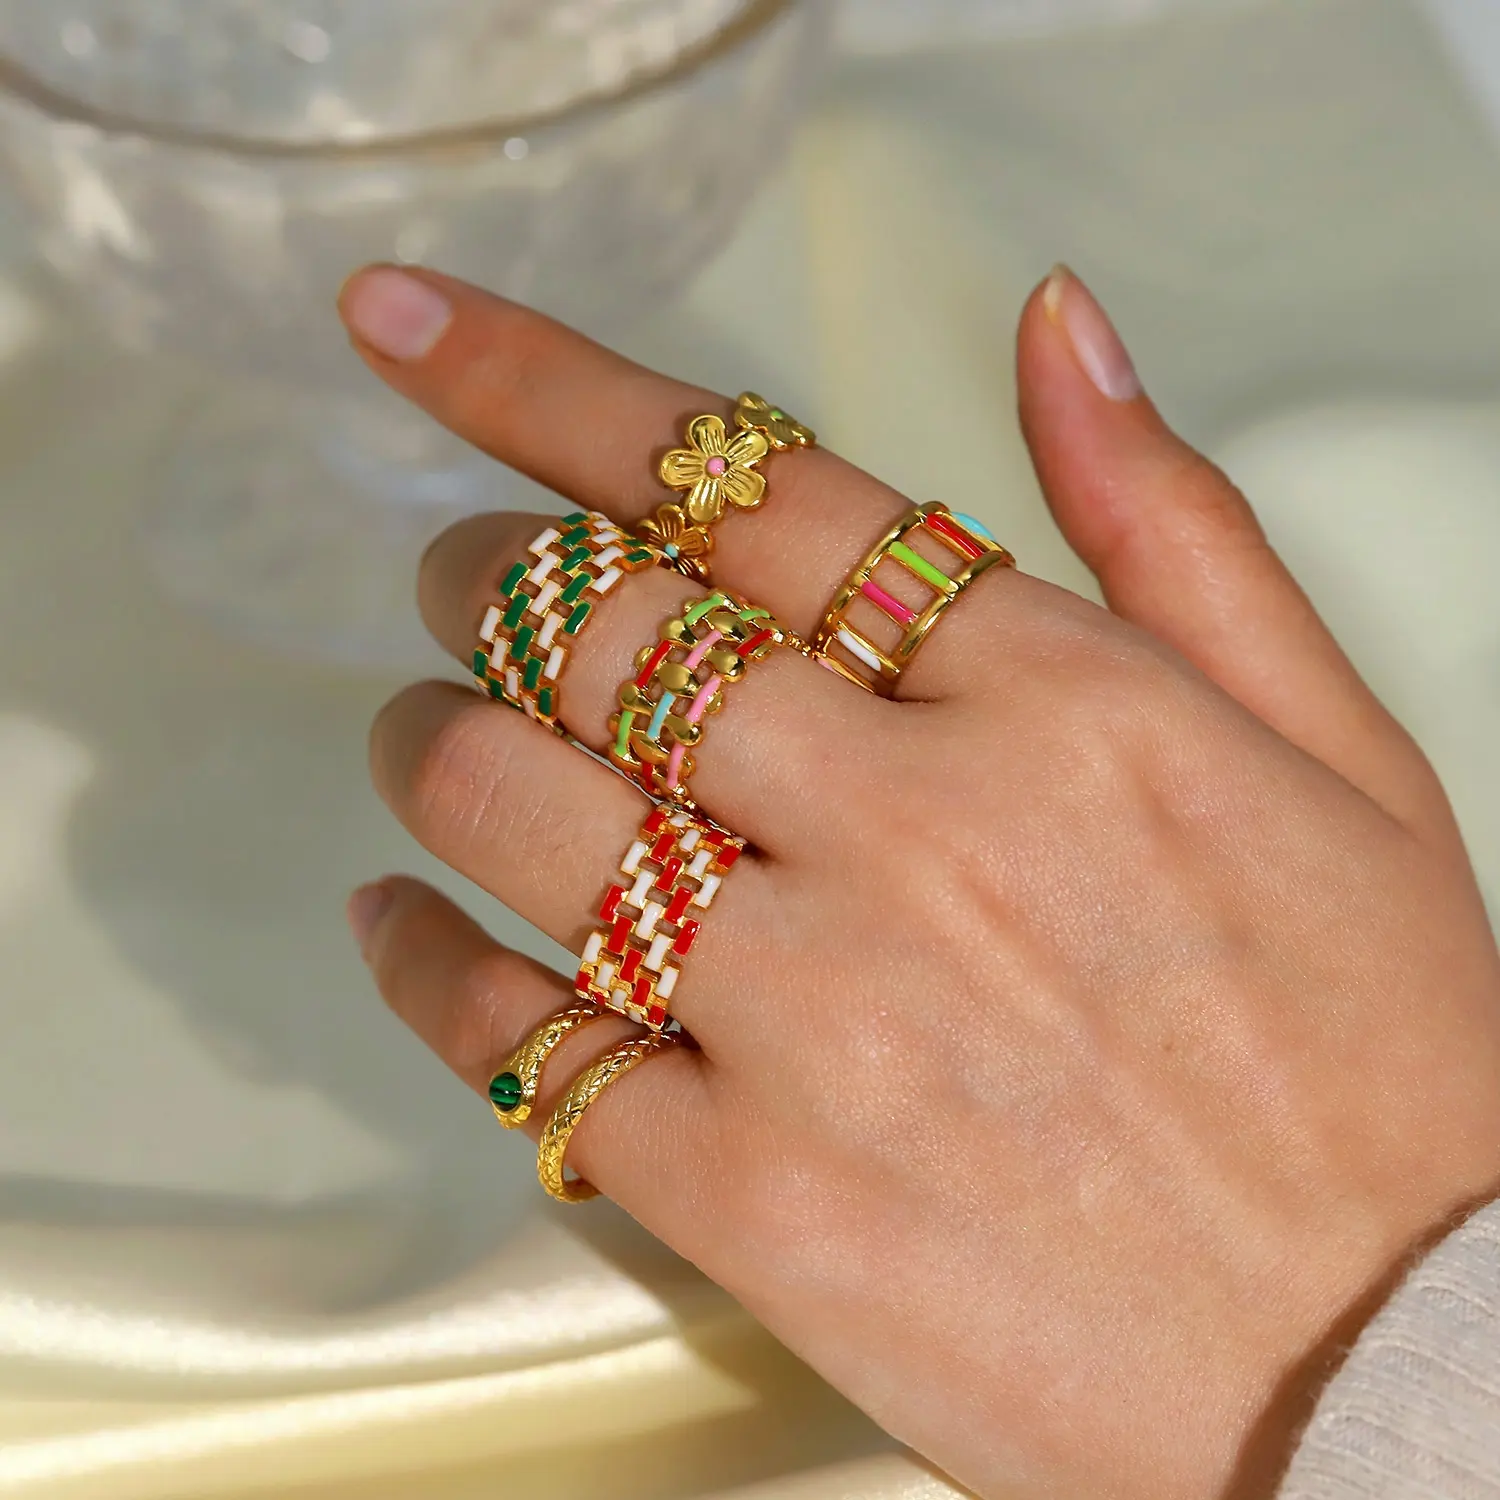 New Fashion Jewelry 18k Gold Colorful Ring Open Finger Ring Waterproof Stainless Steel Jewelry Ring Girl